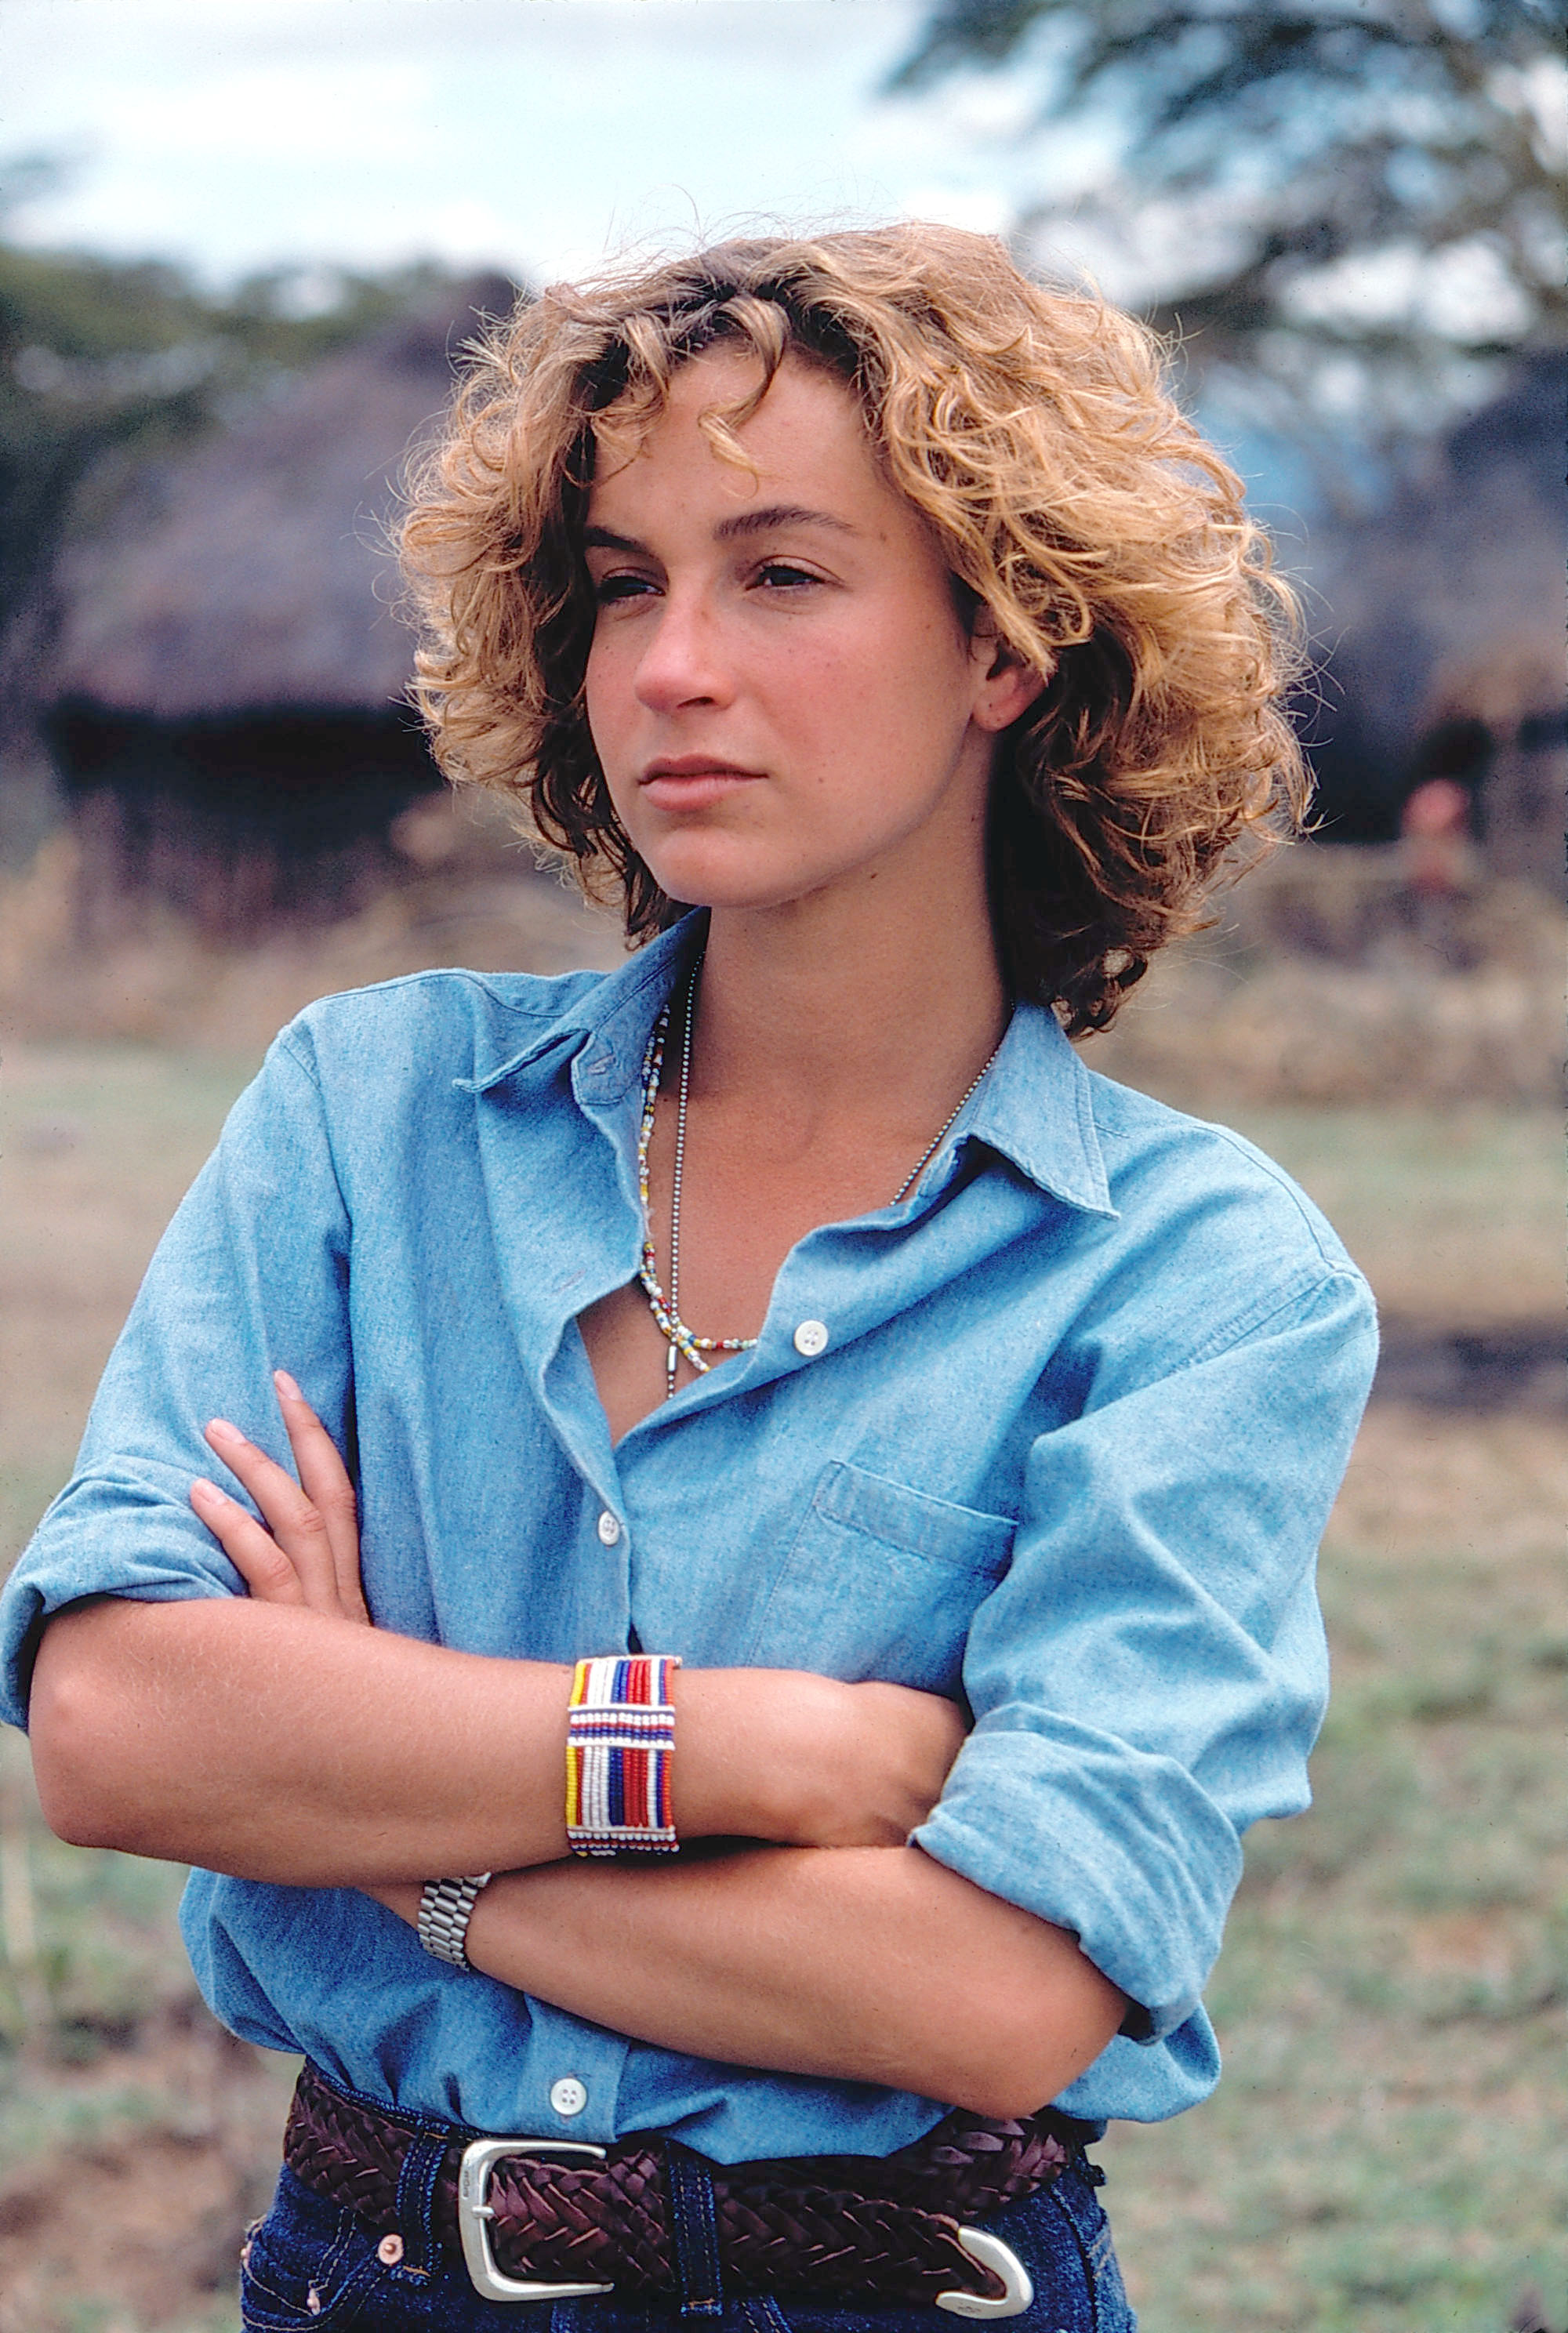 Jennifer Grey as Christina in the made-for-TV movie "Eyes of a Witness" in November 1990 | Source: Getty Images